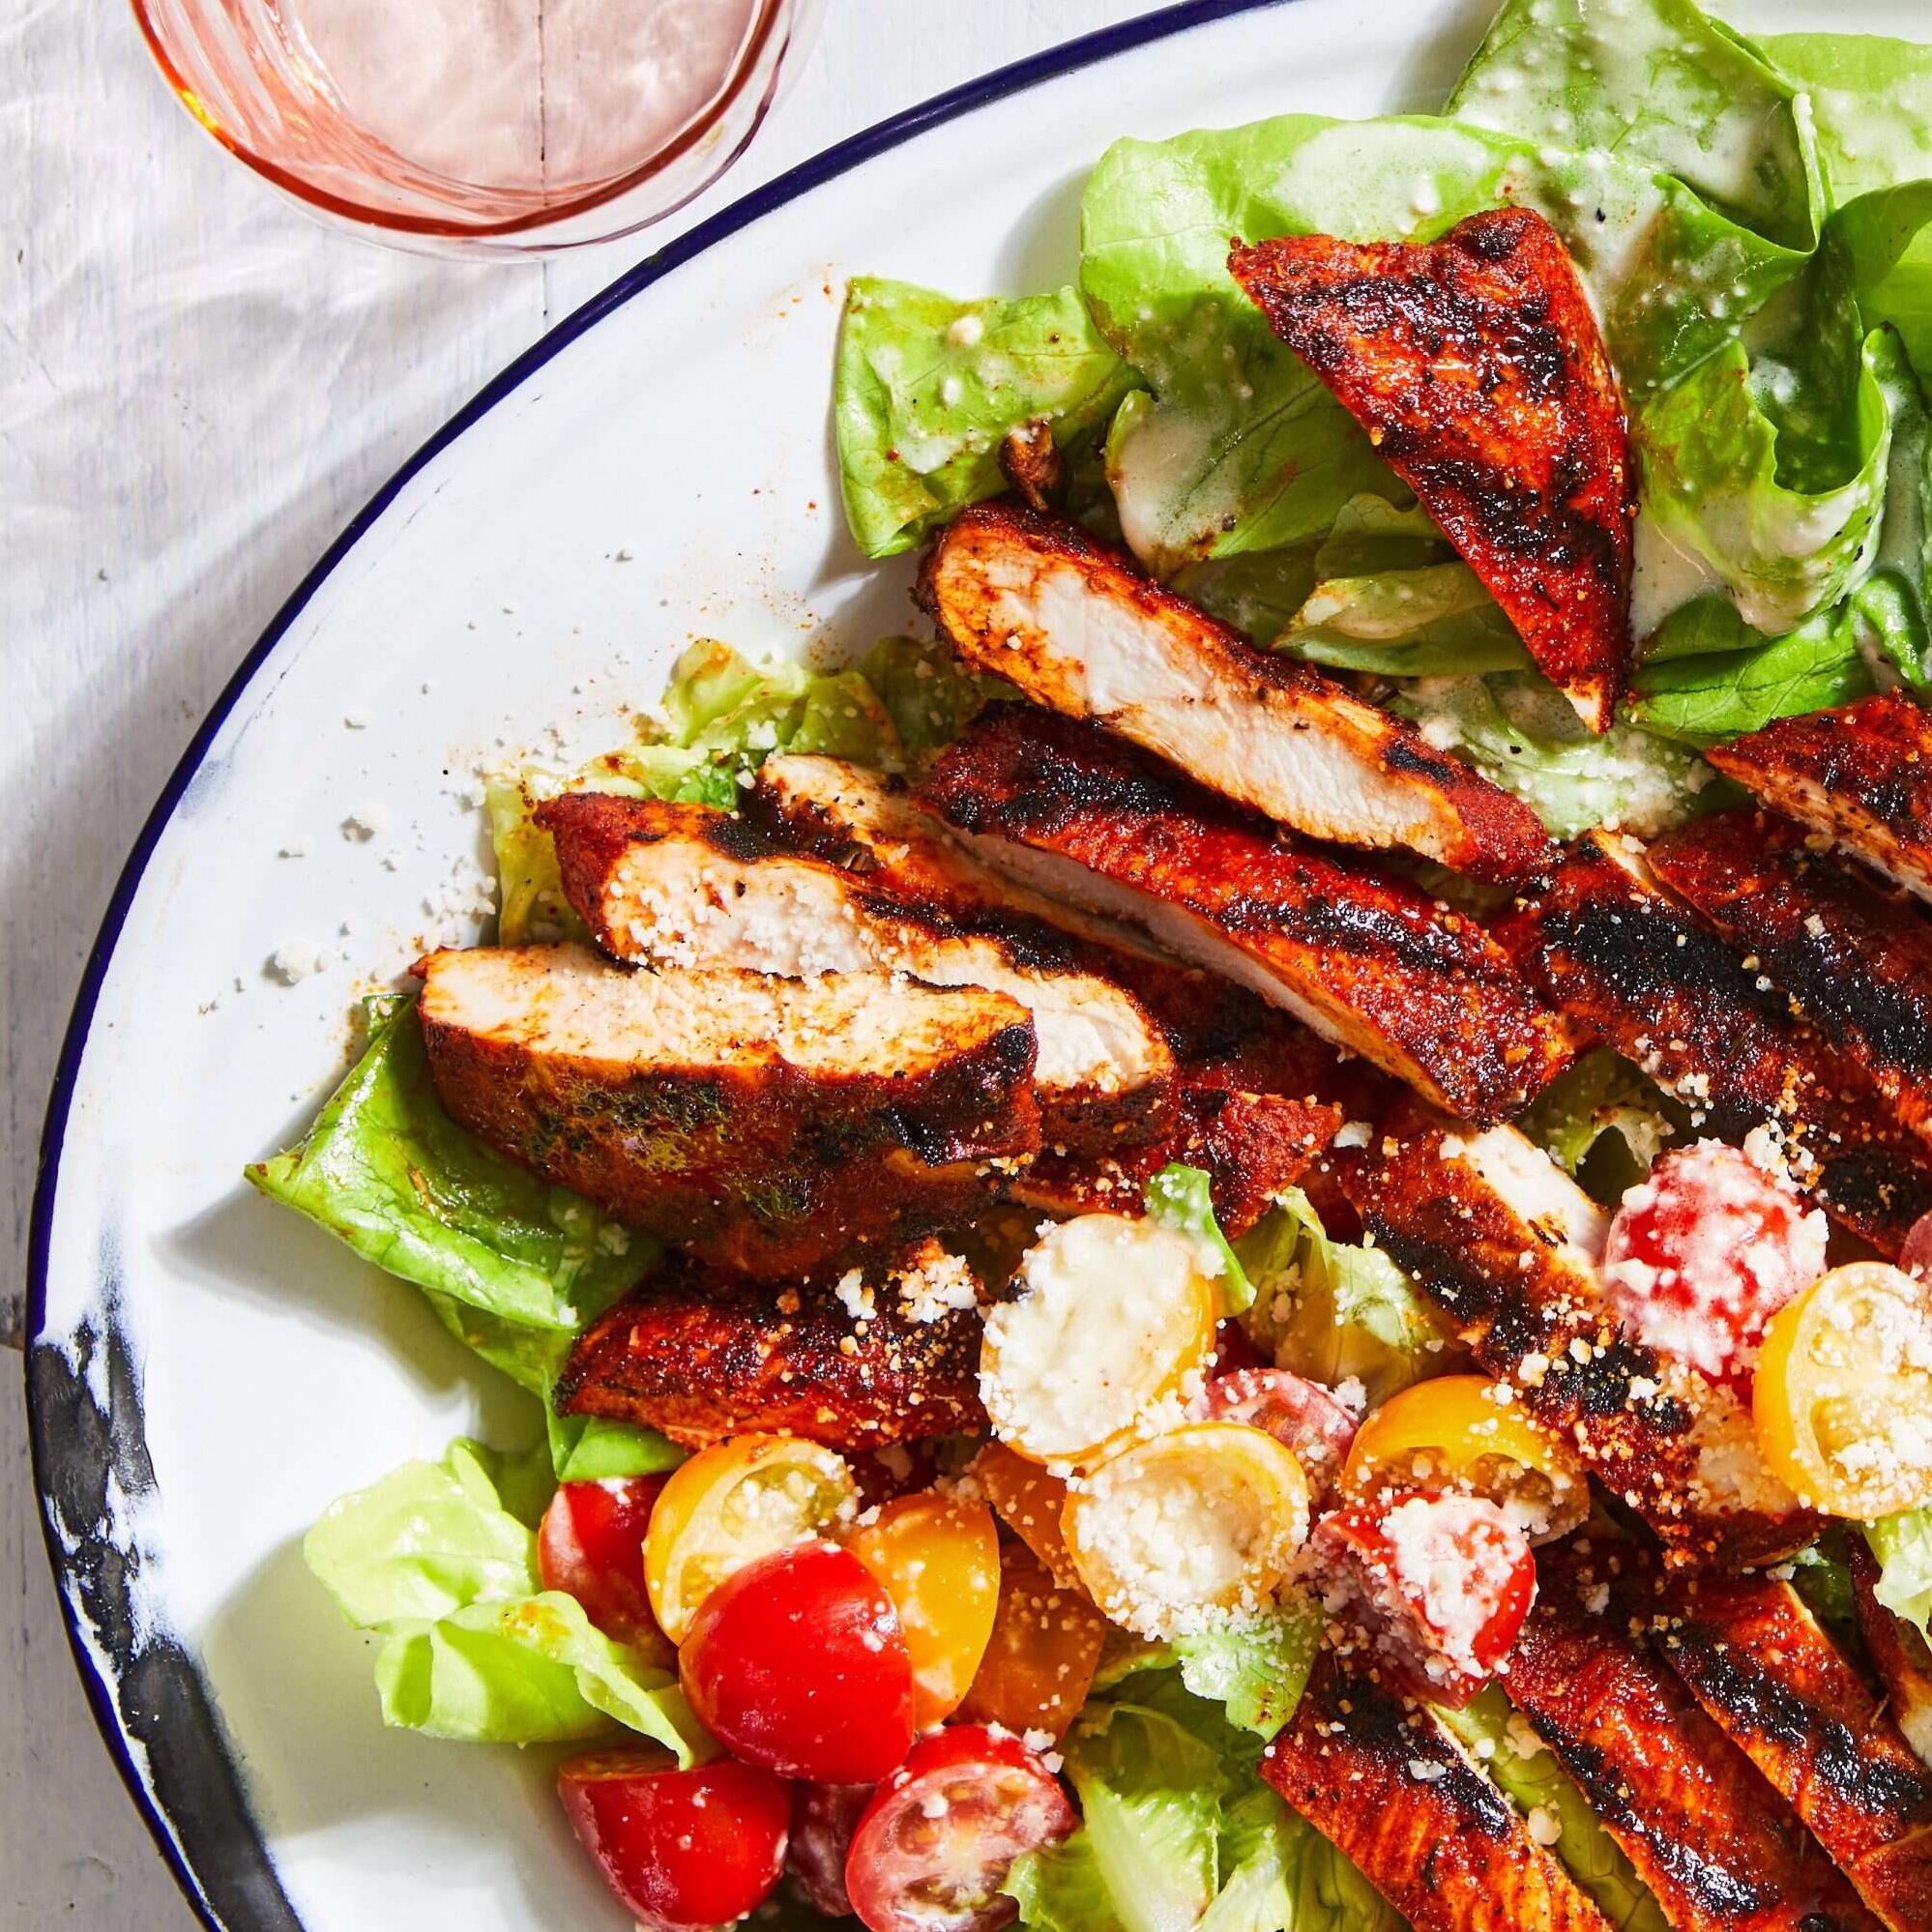  Get ready to spice up your salad game with this blackened chicken beauty